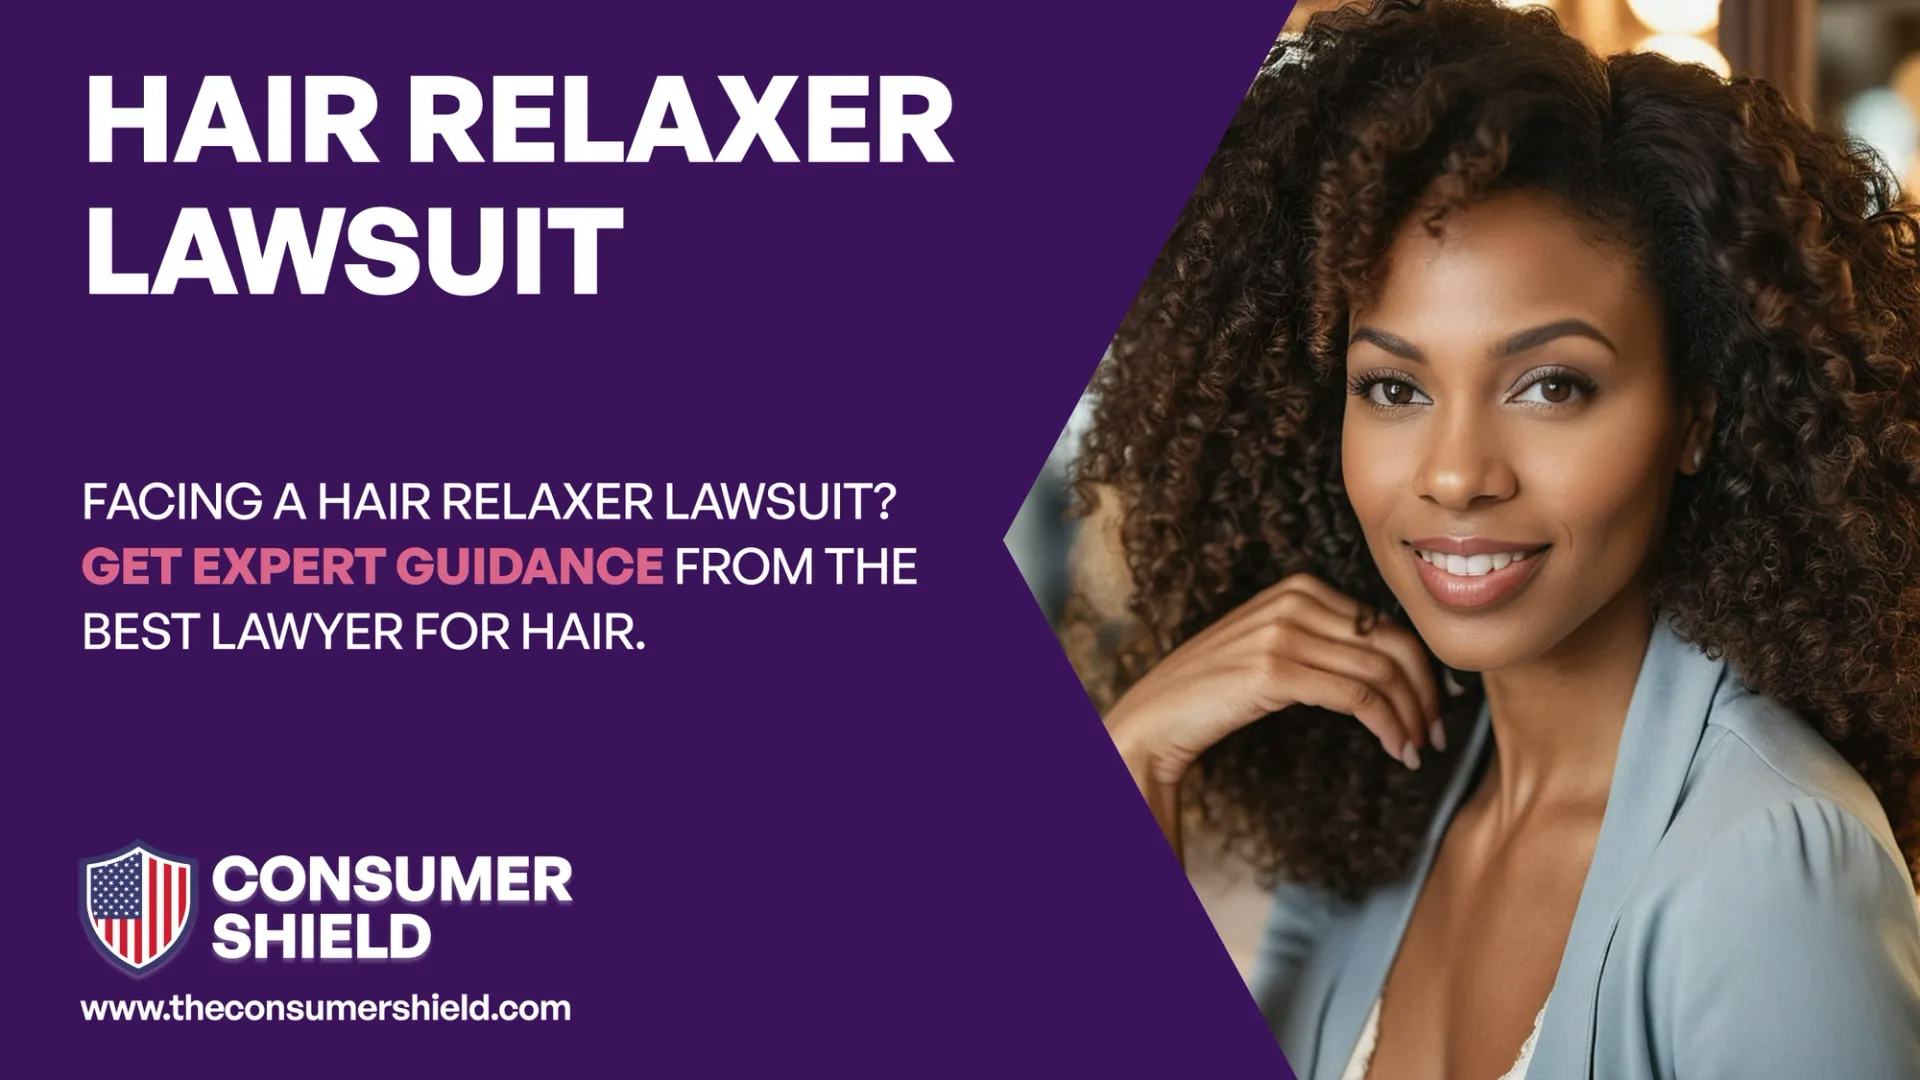 When Will the Hair Relaxer Lawsuit Be Settled?